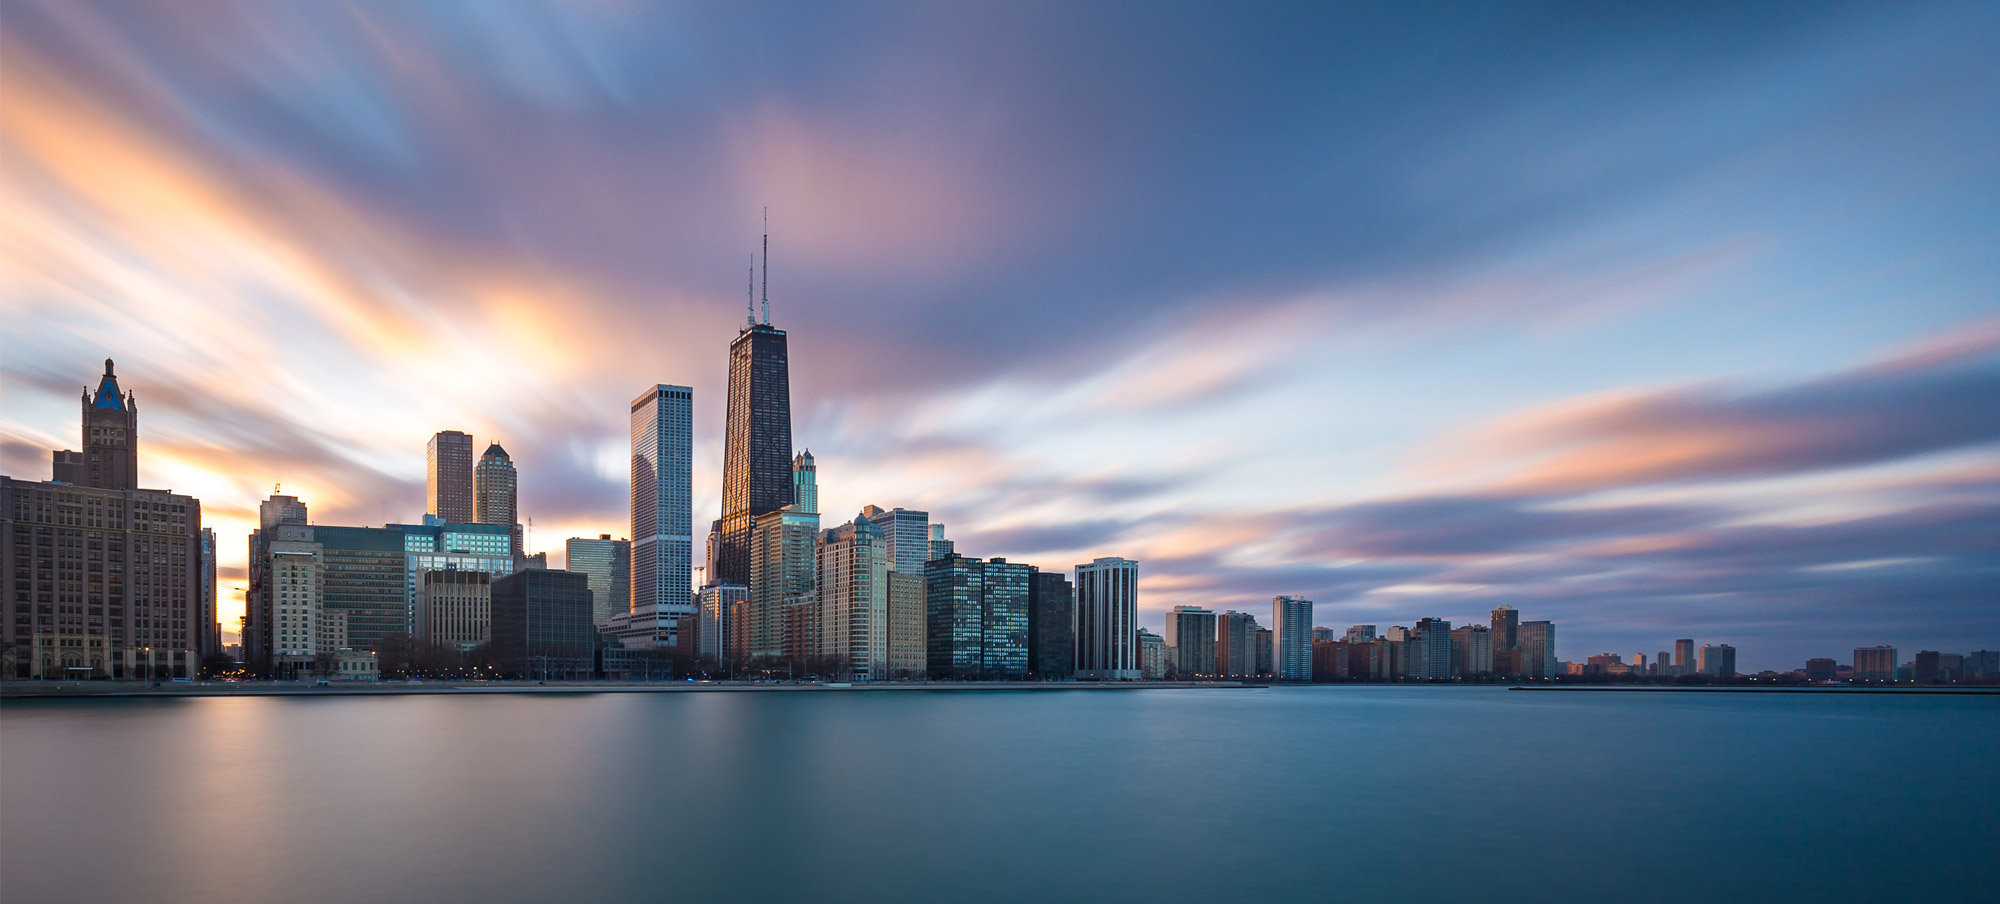 skyline view of chicago